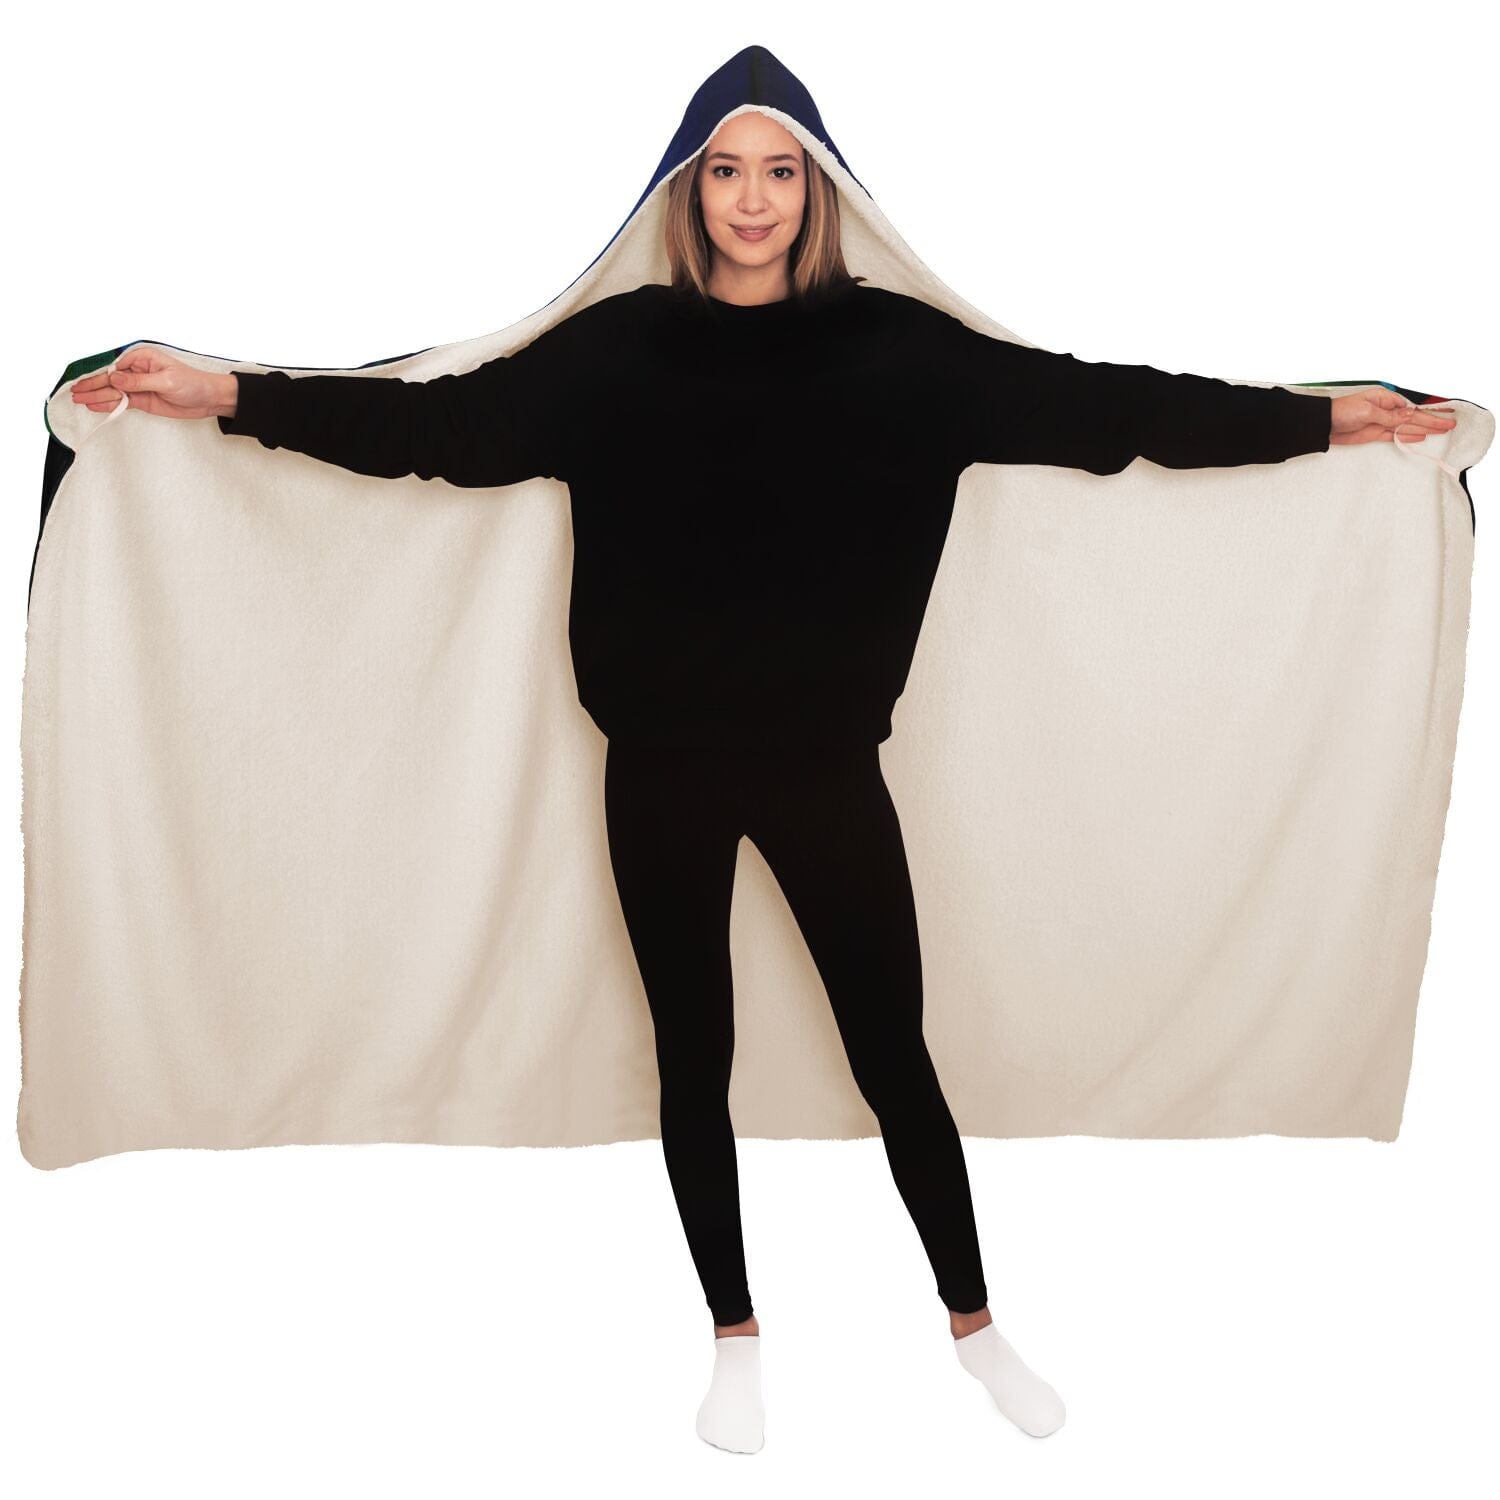 A girl showing a unisex adult hooded blanket